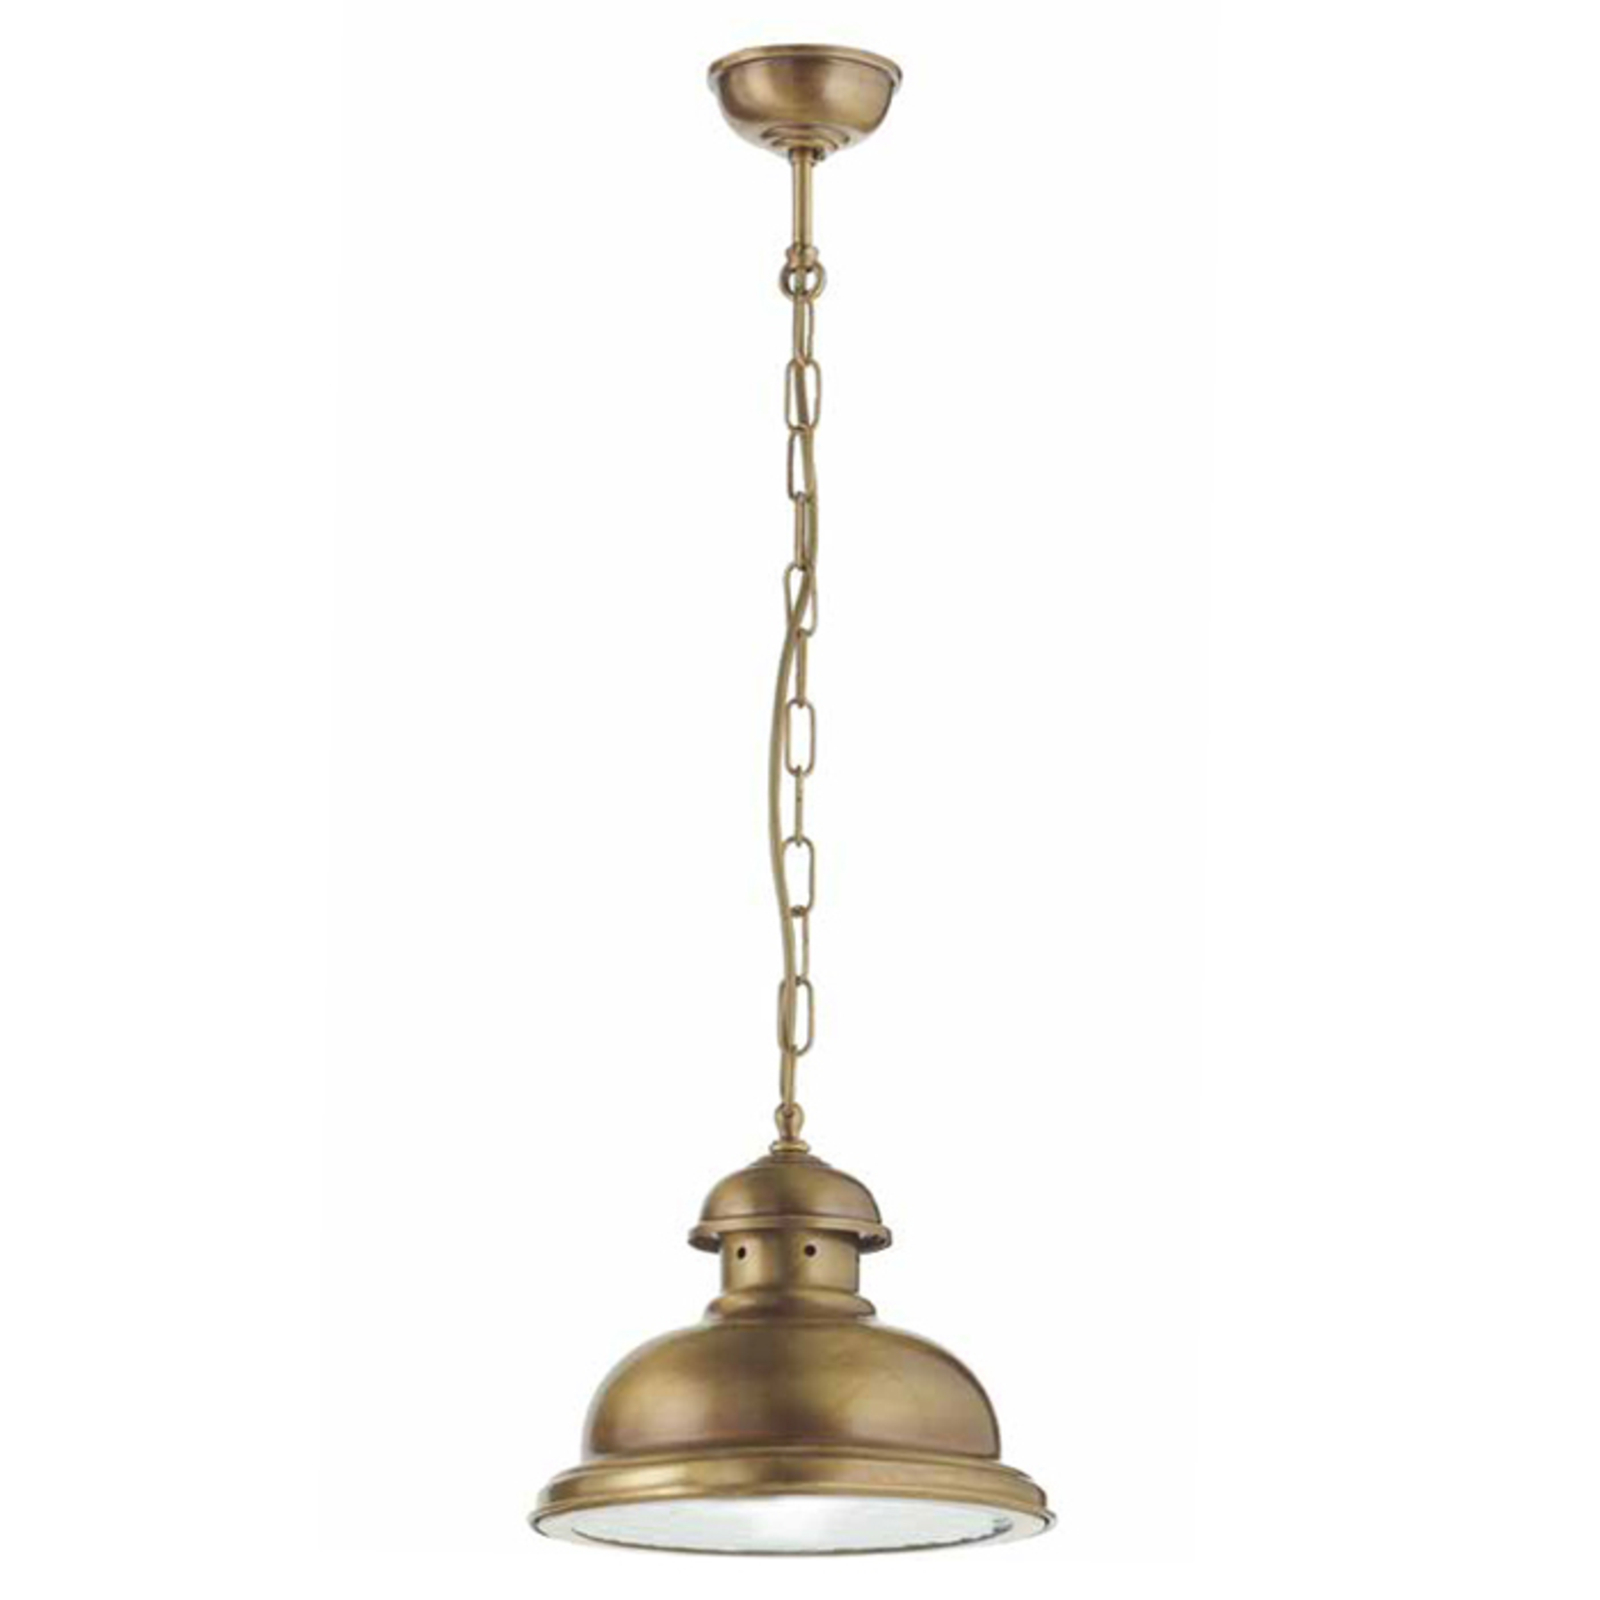 Antique style Scirocco hanging light, 25 cm